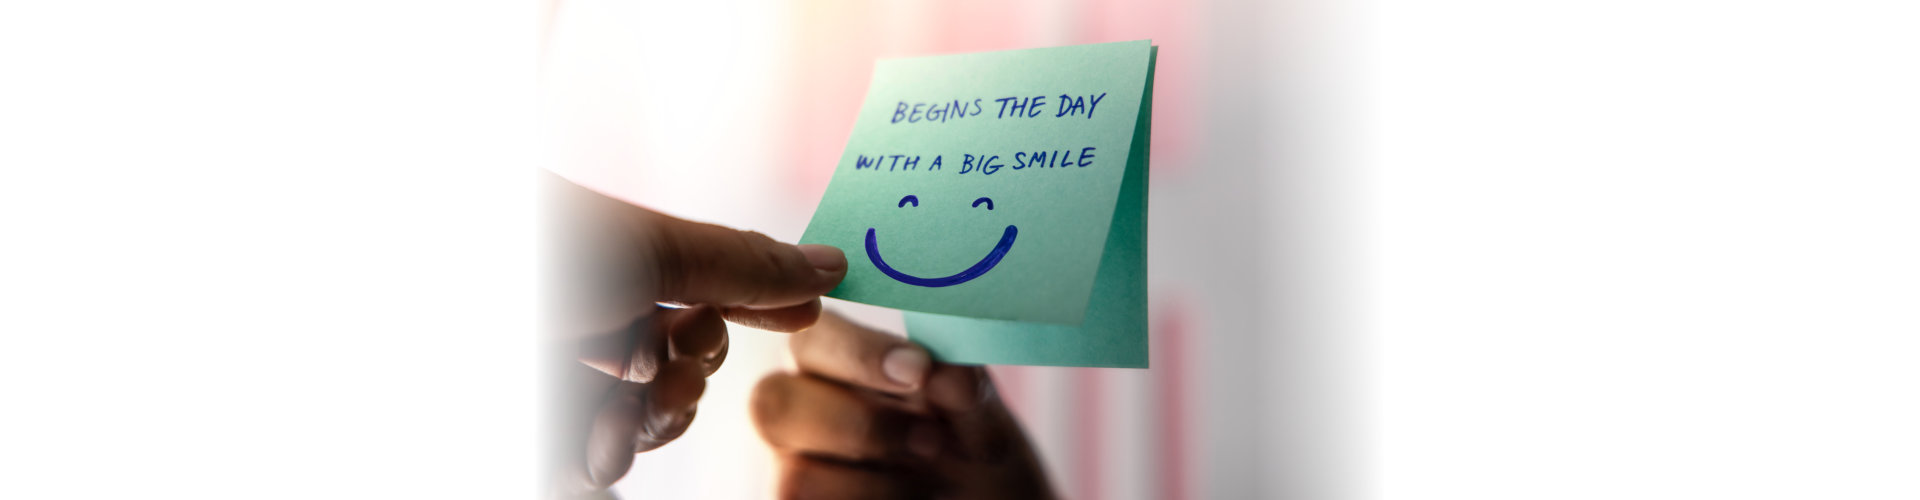 Begins the day with a big smile written in a sticky note